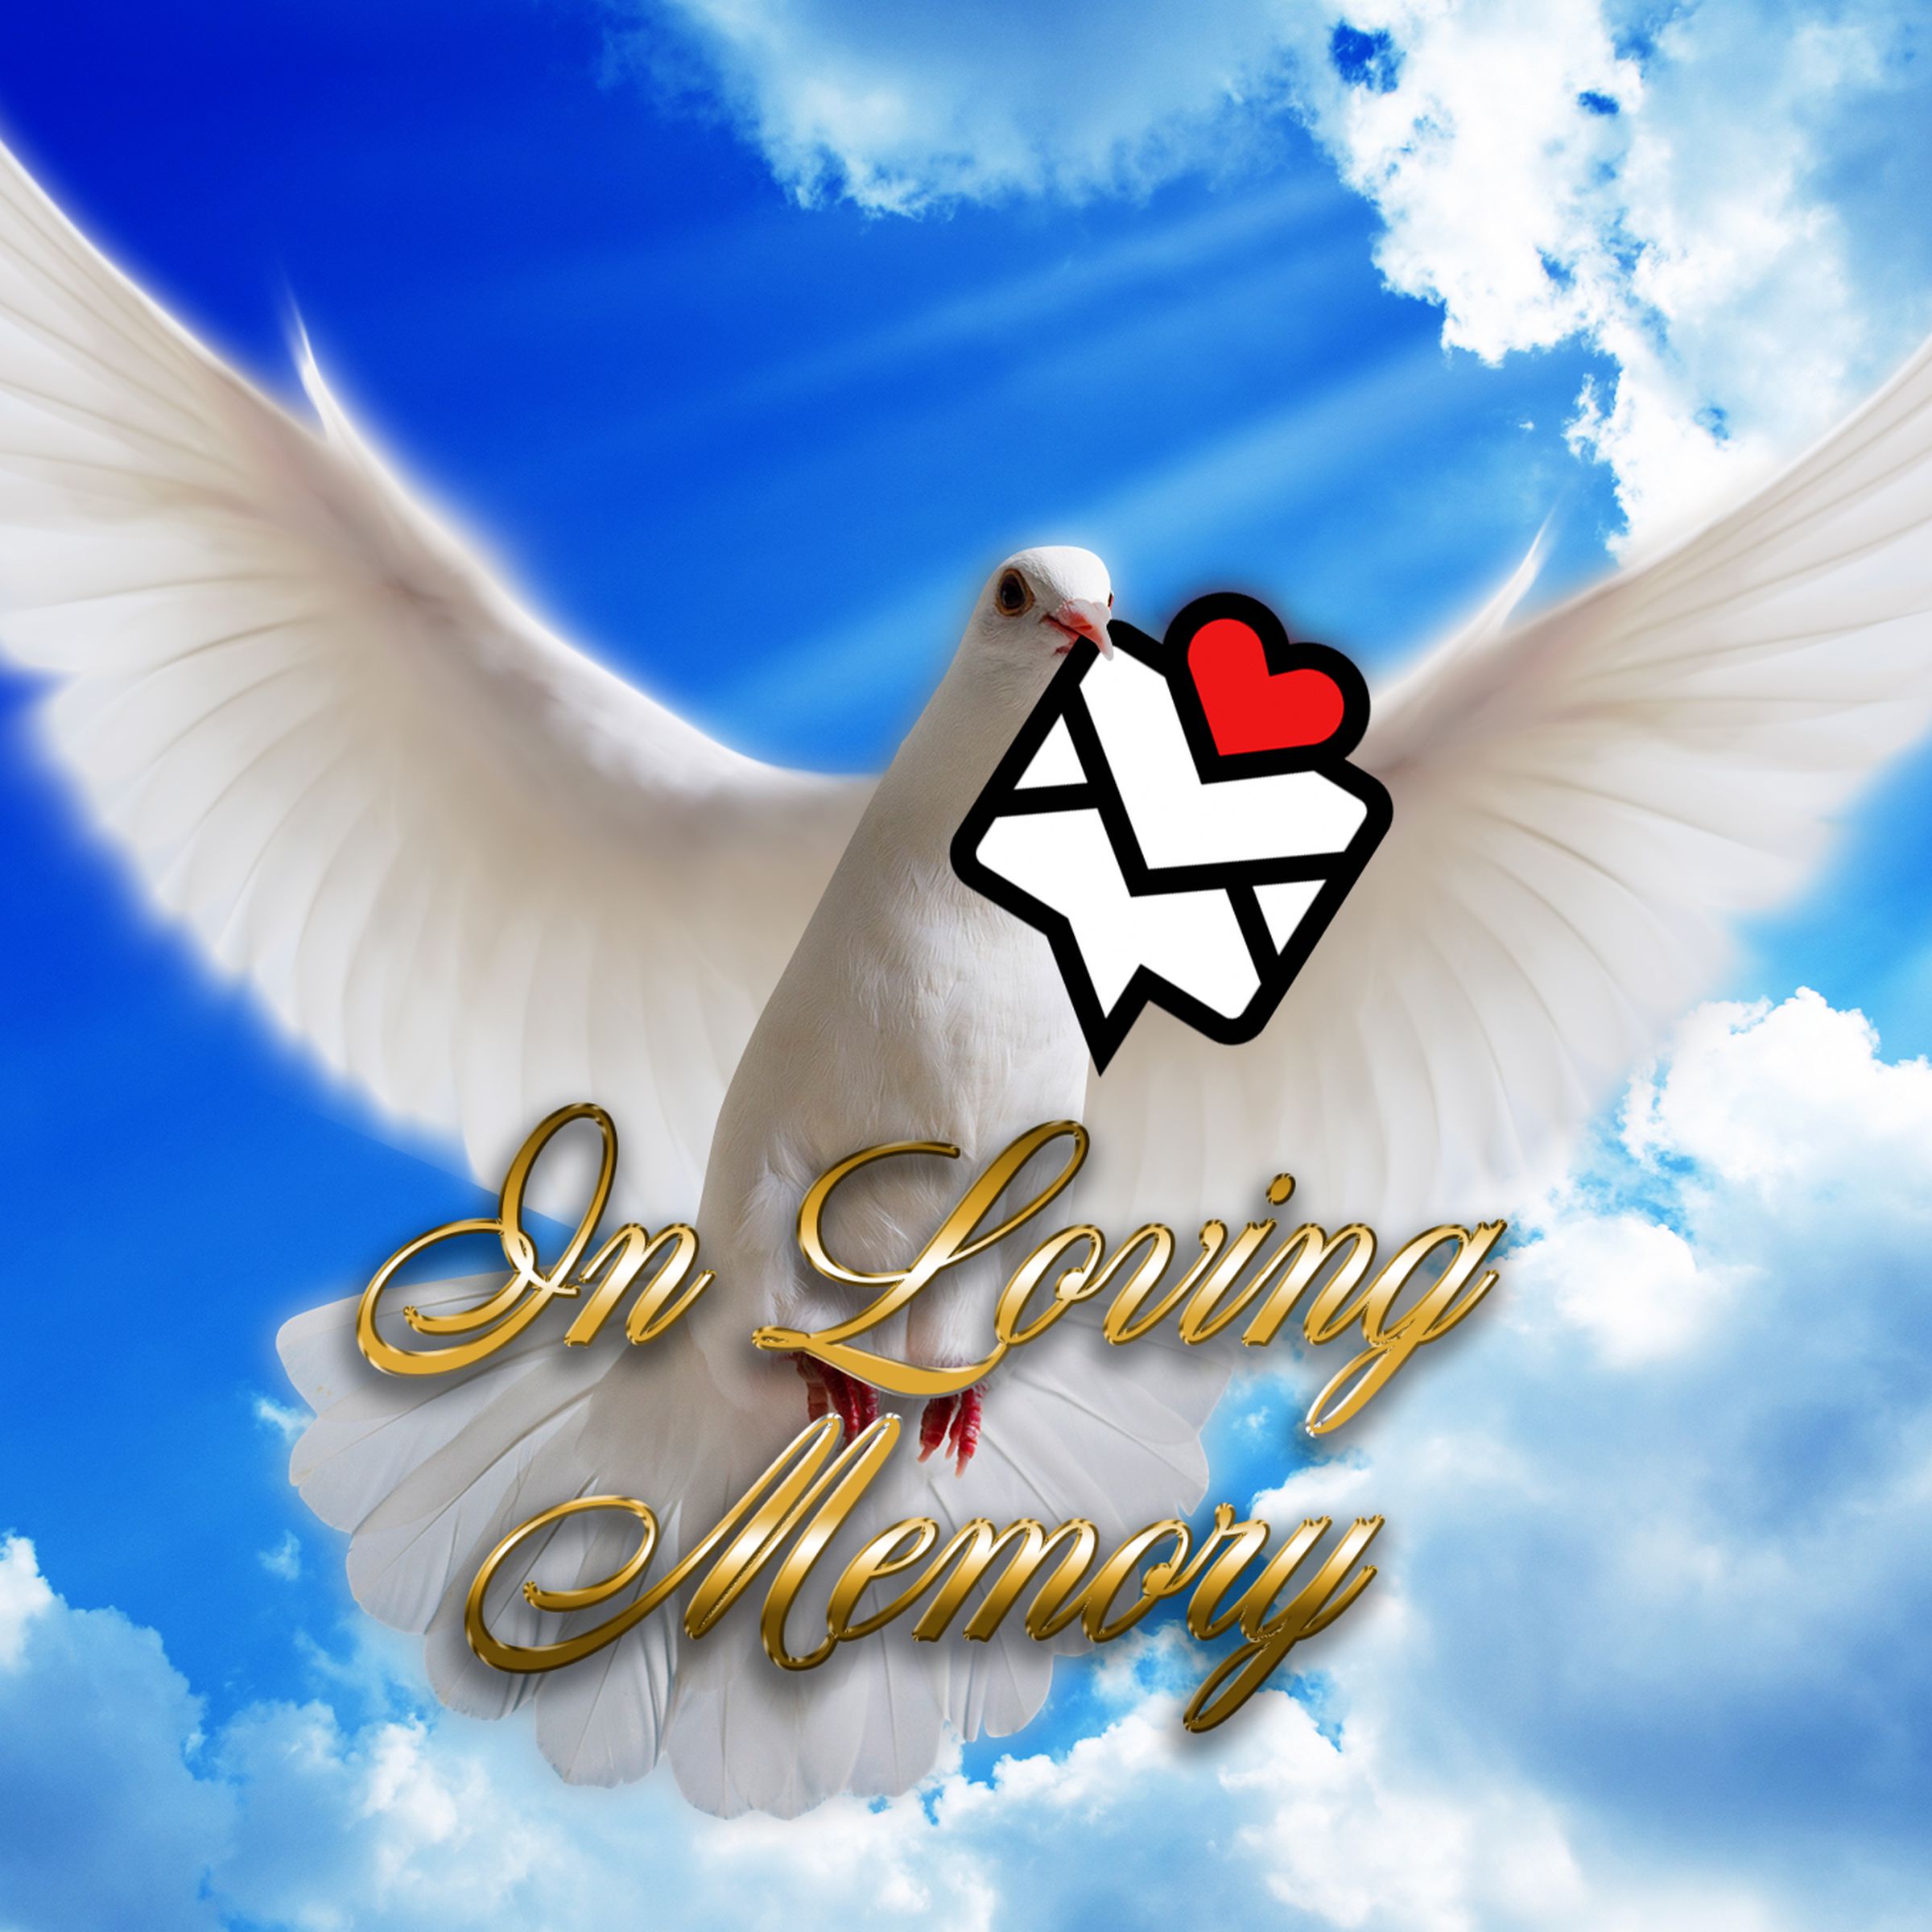 Photo illustration of a white dove carrying the TinyLetter logo with golden script that reads “In Loving Memory”.